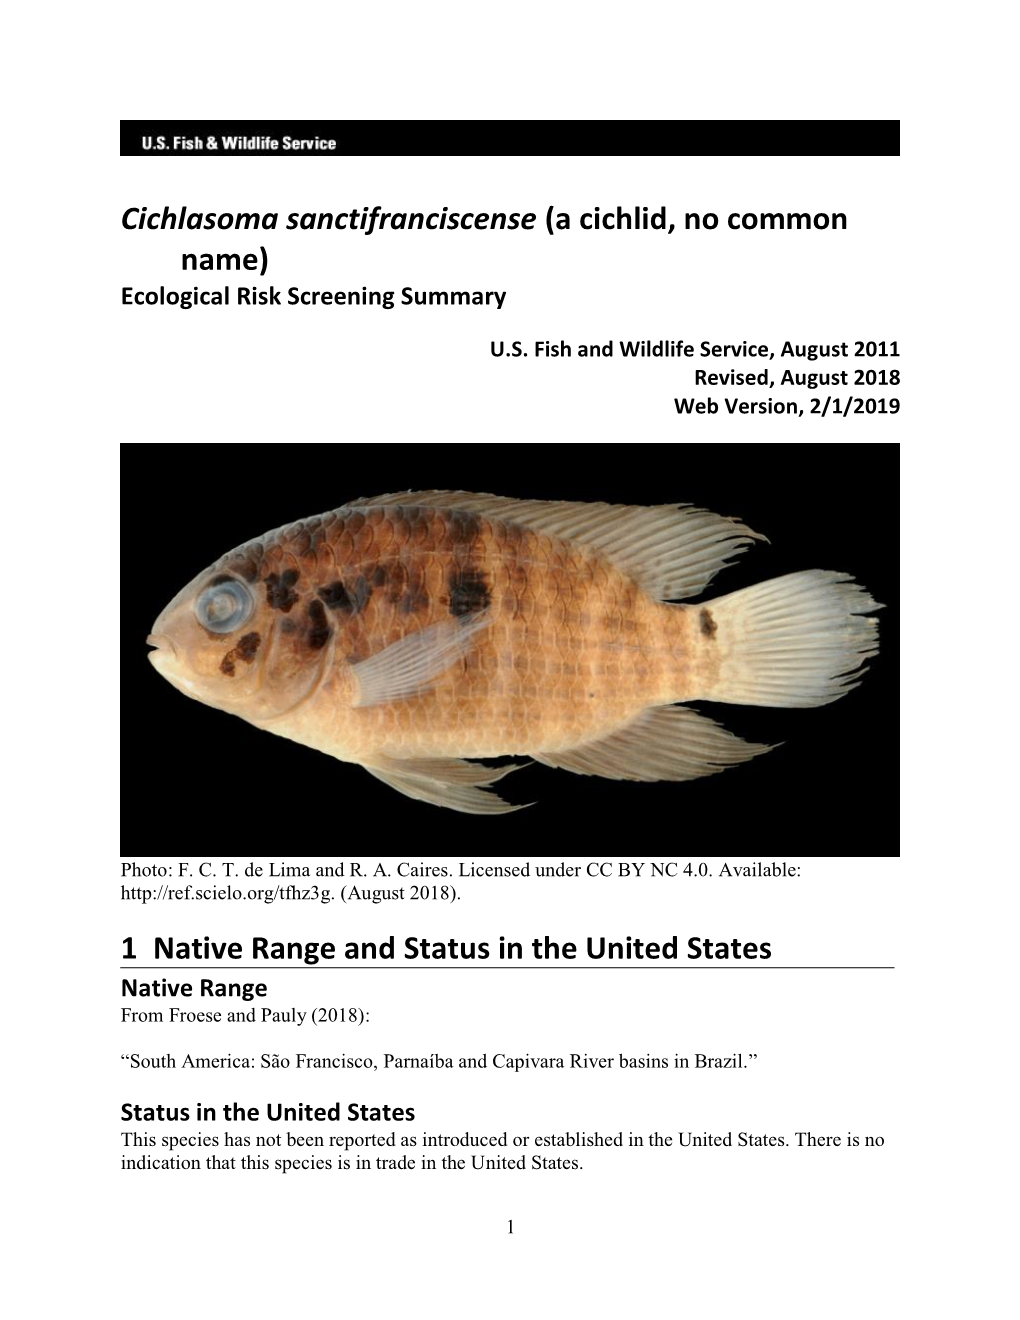 Cichlasoma Sanctifranciscense (A Cichlid, No Common Name) Ecological Risk Screening Summary